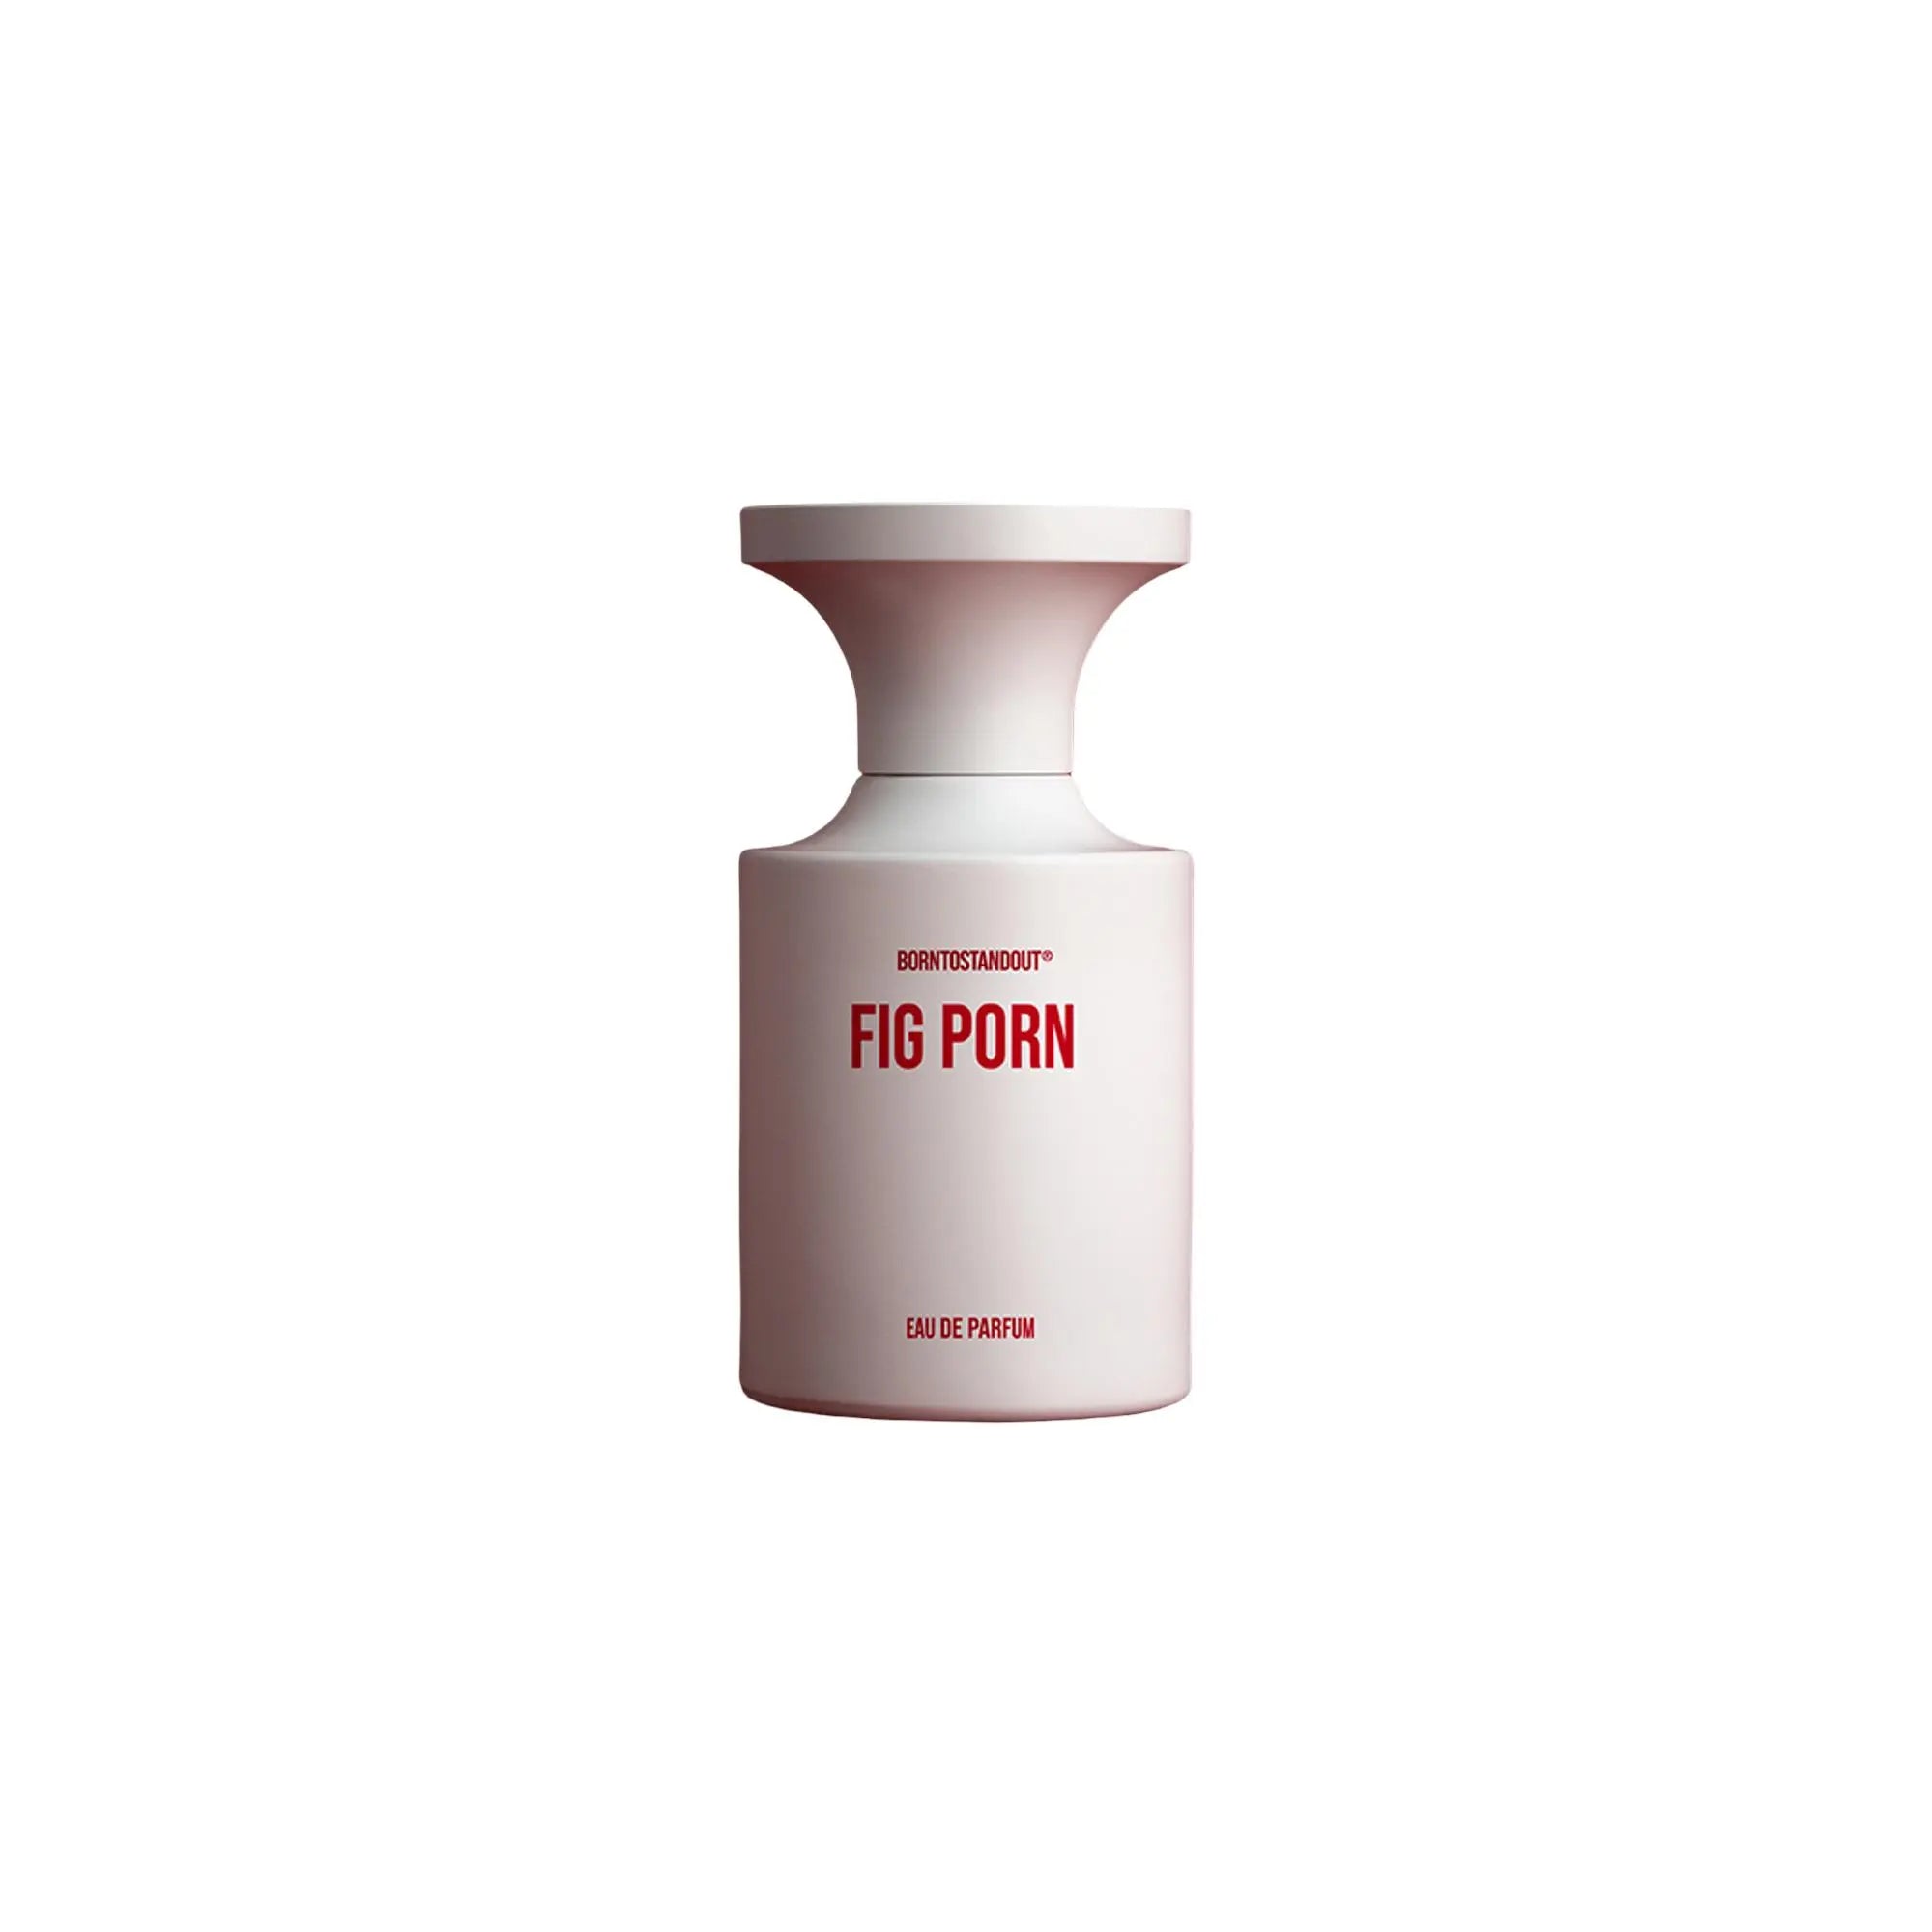 Born to stand out Fig Porn - 50 ml